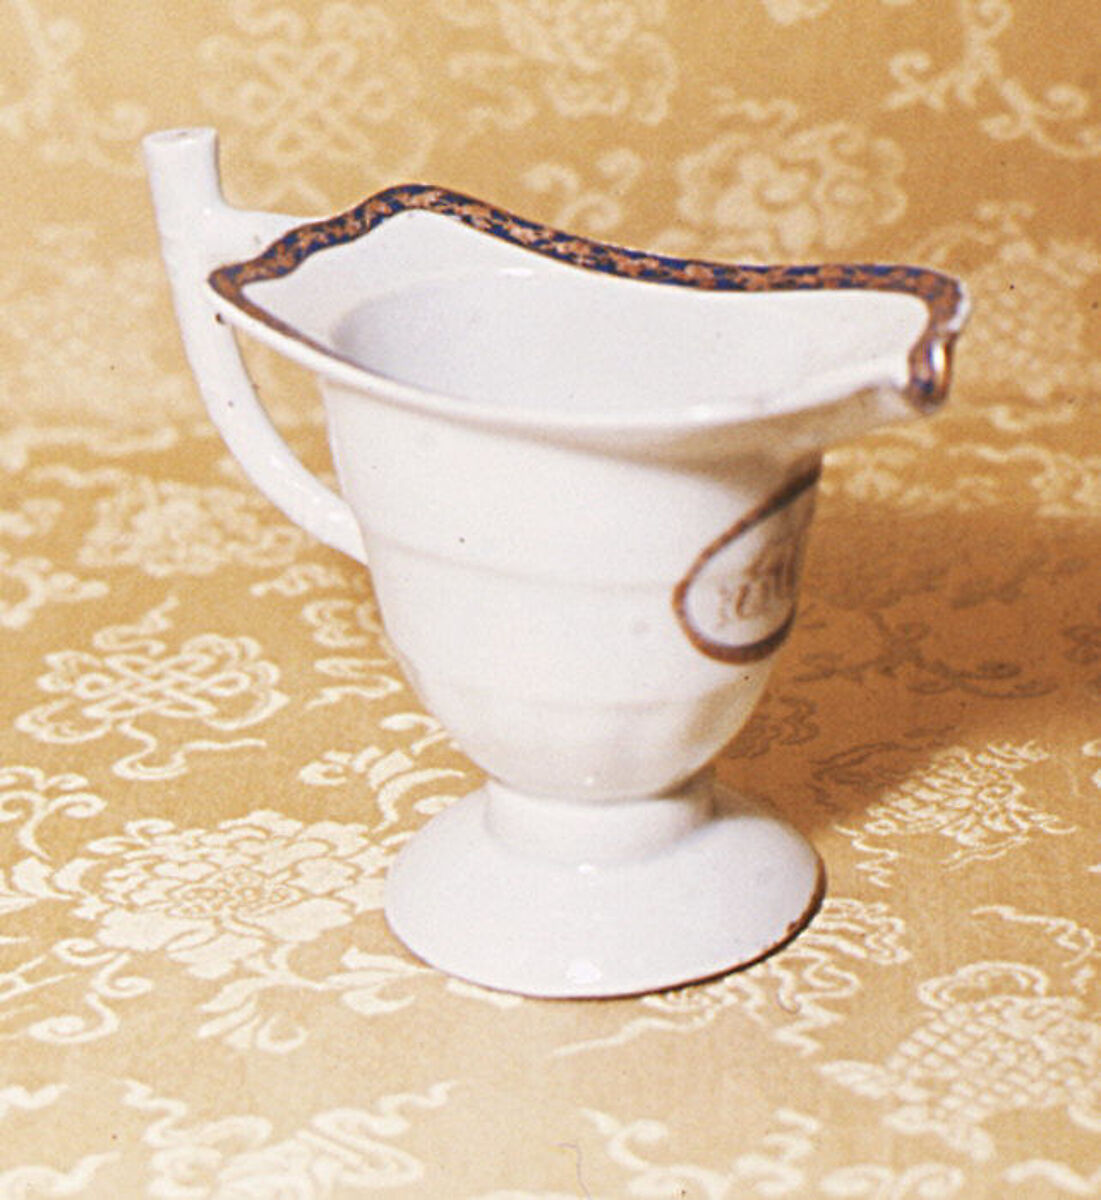 Creamer (part of a service), Hard-paste porcelain, Chinese, probably for British market 